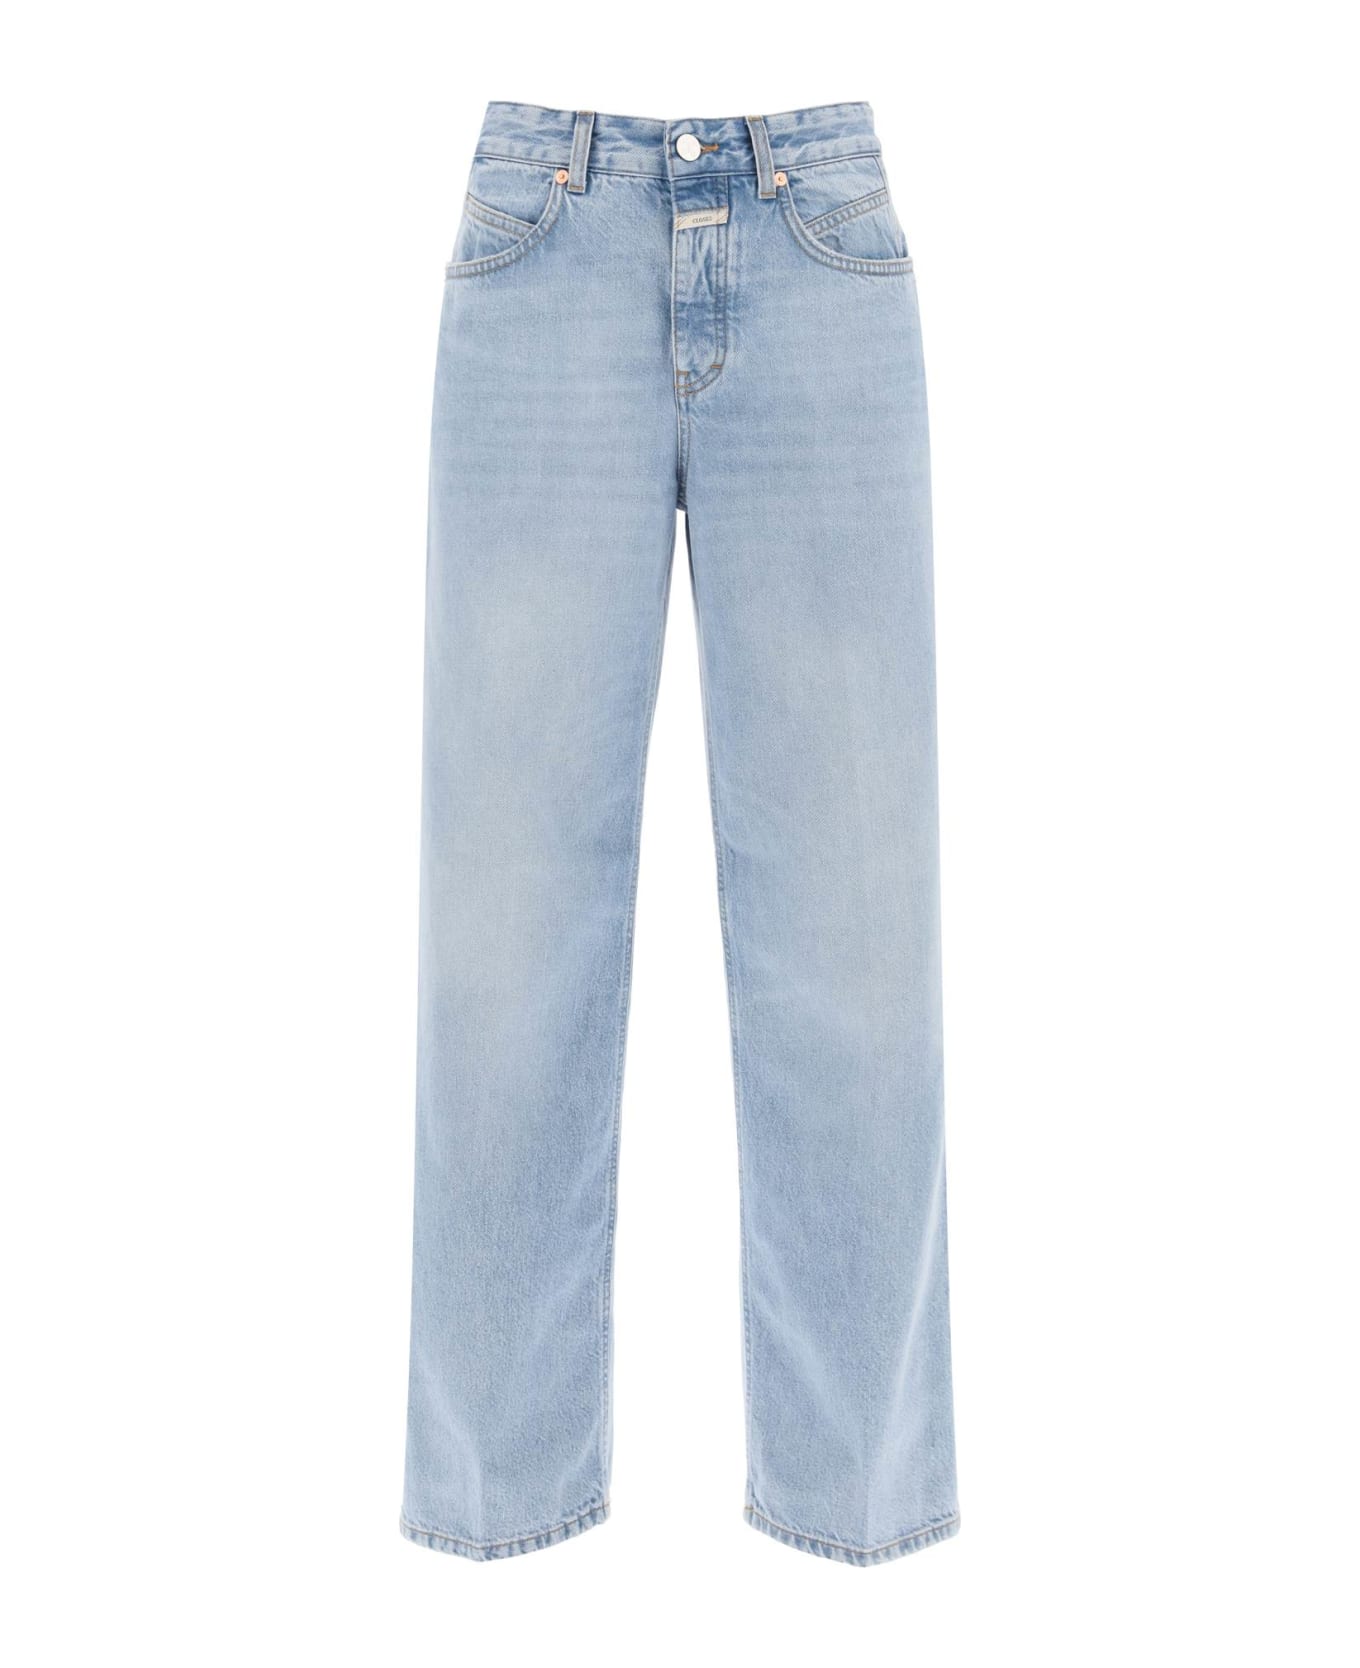 Closed Loose Jeans With Tapered Cut - LIGHT BLUE (Light blue)